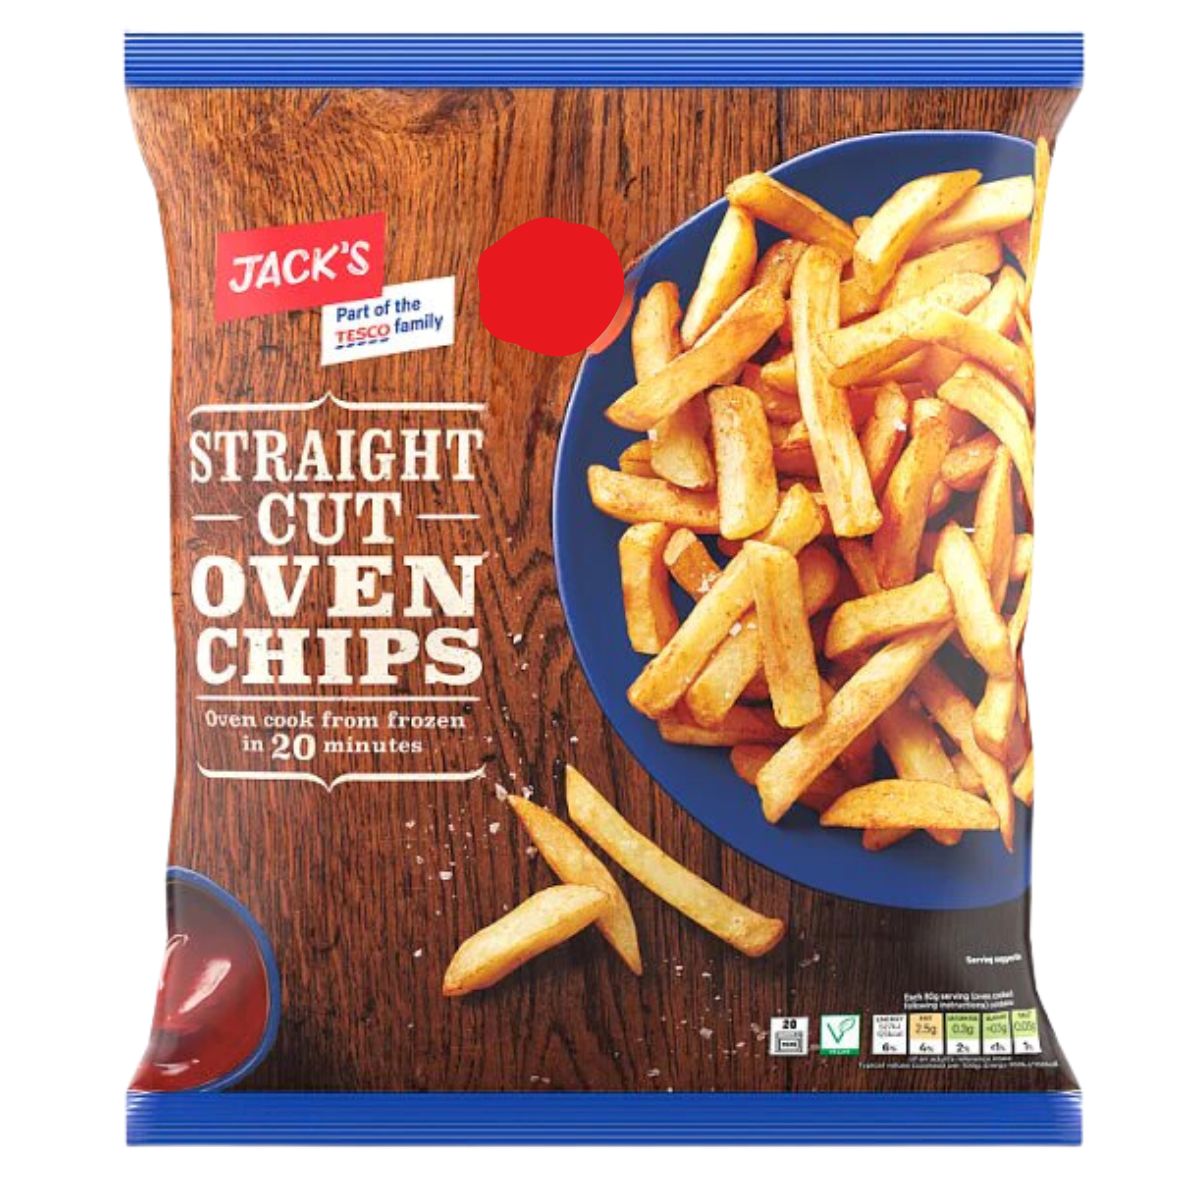 A bag of Jacks - Straight Cut Oven Chips - 750g.